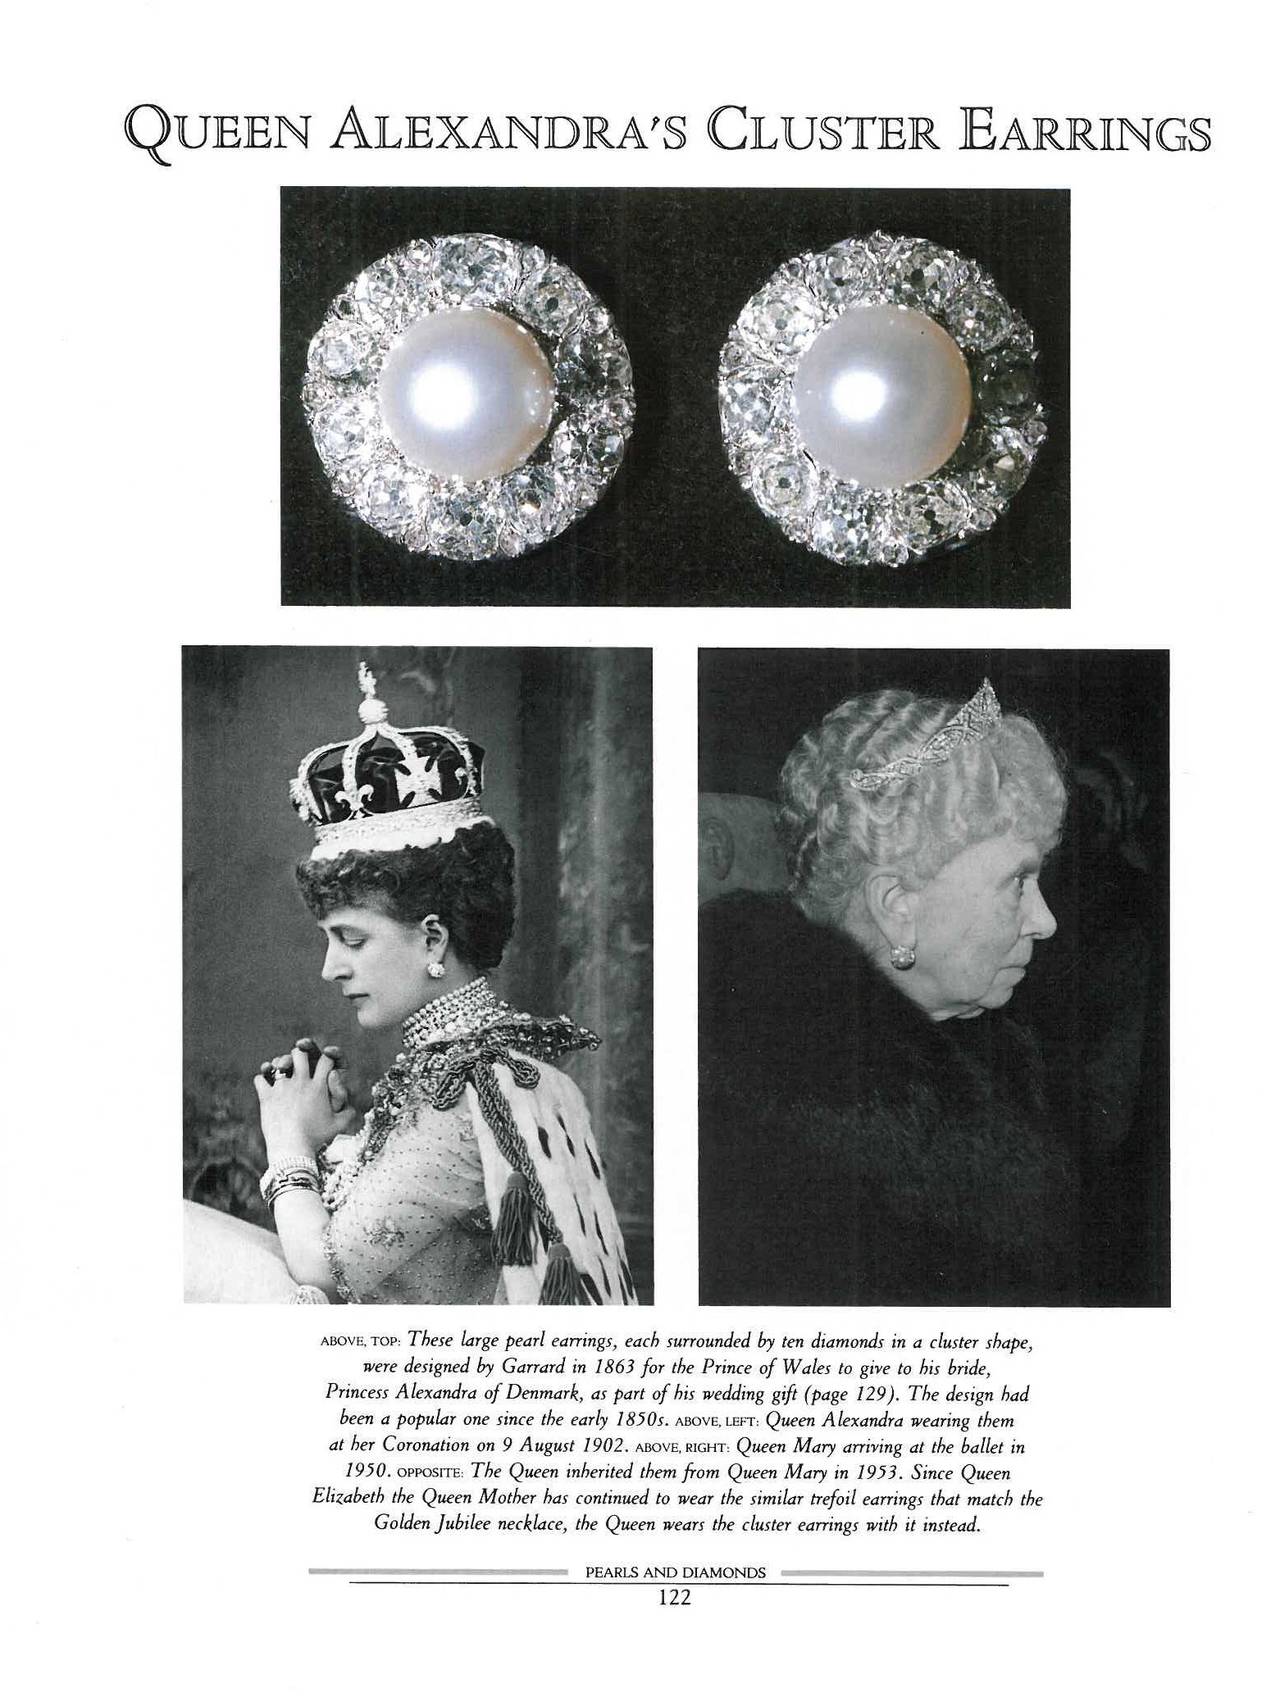 Book of THE QUEEN'S JEWELS - The Personal Collection of Elizabeth ll 1